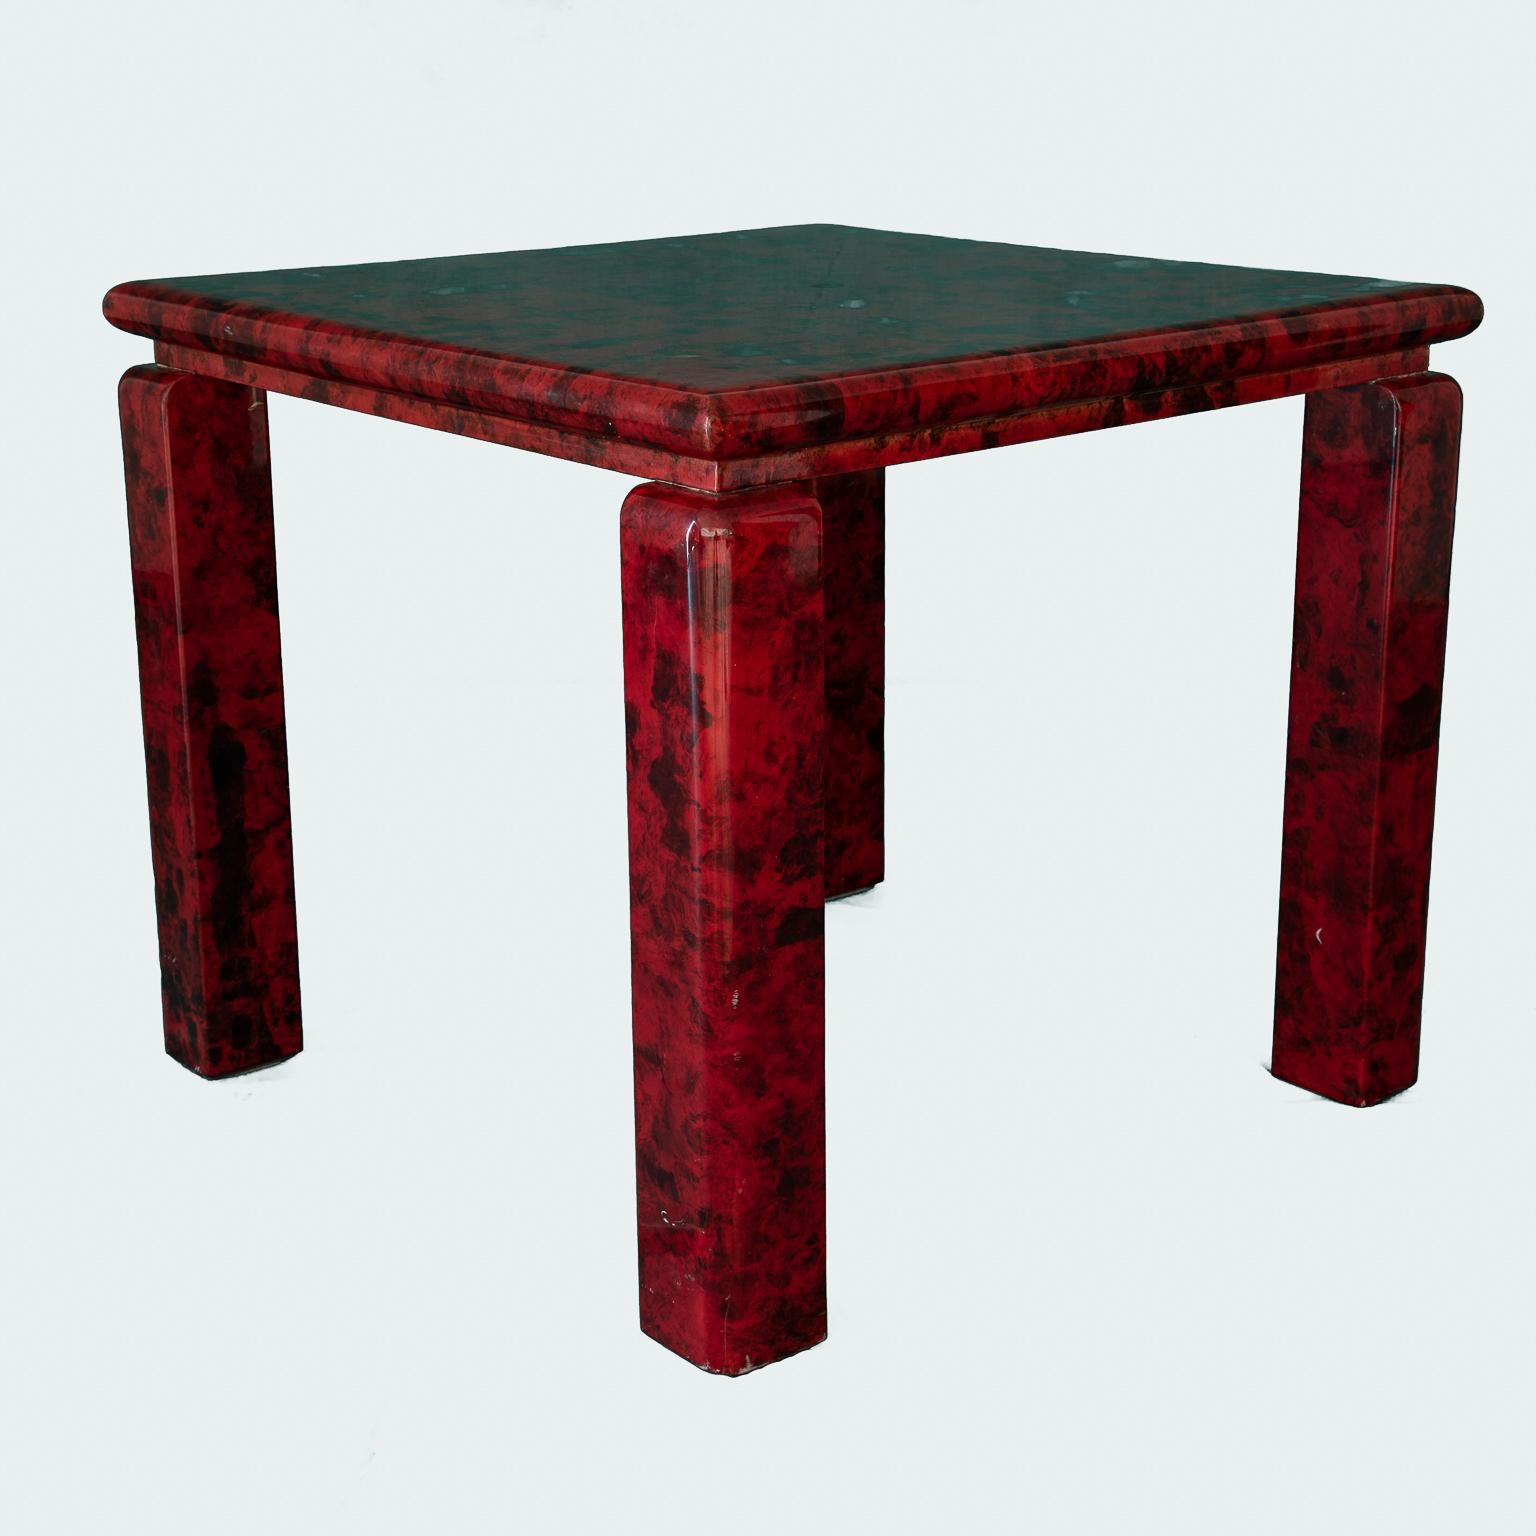 Table made of goatskin in red color from furniture designer Aldo Tura, is in perfect condition.